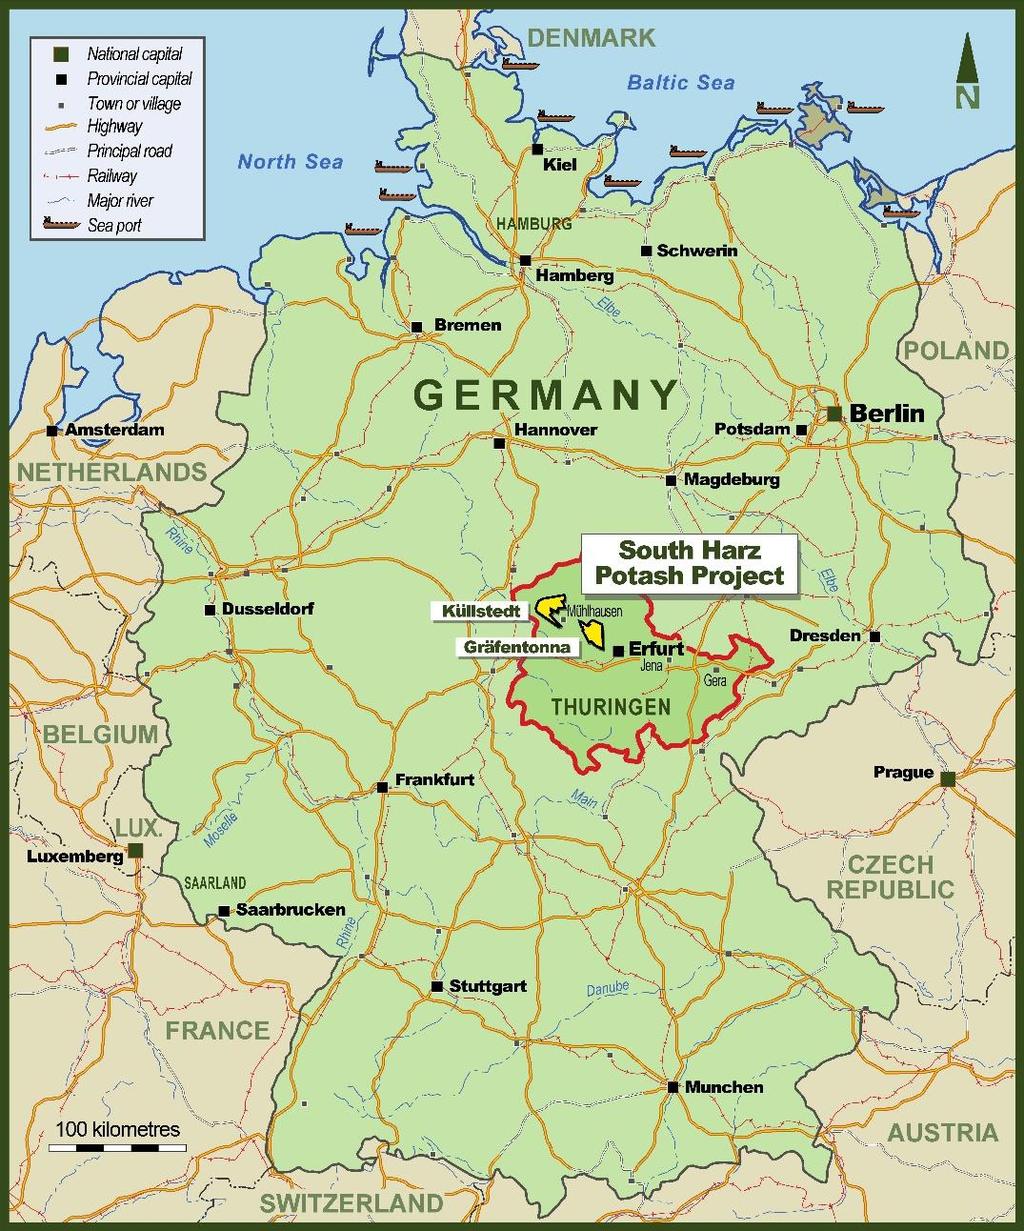 GERMAN SUTH HARZ REGIN Davenport owns three perpetual mining licences and two exploration licences covering 659km 2 in the South Harz potash basin.